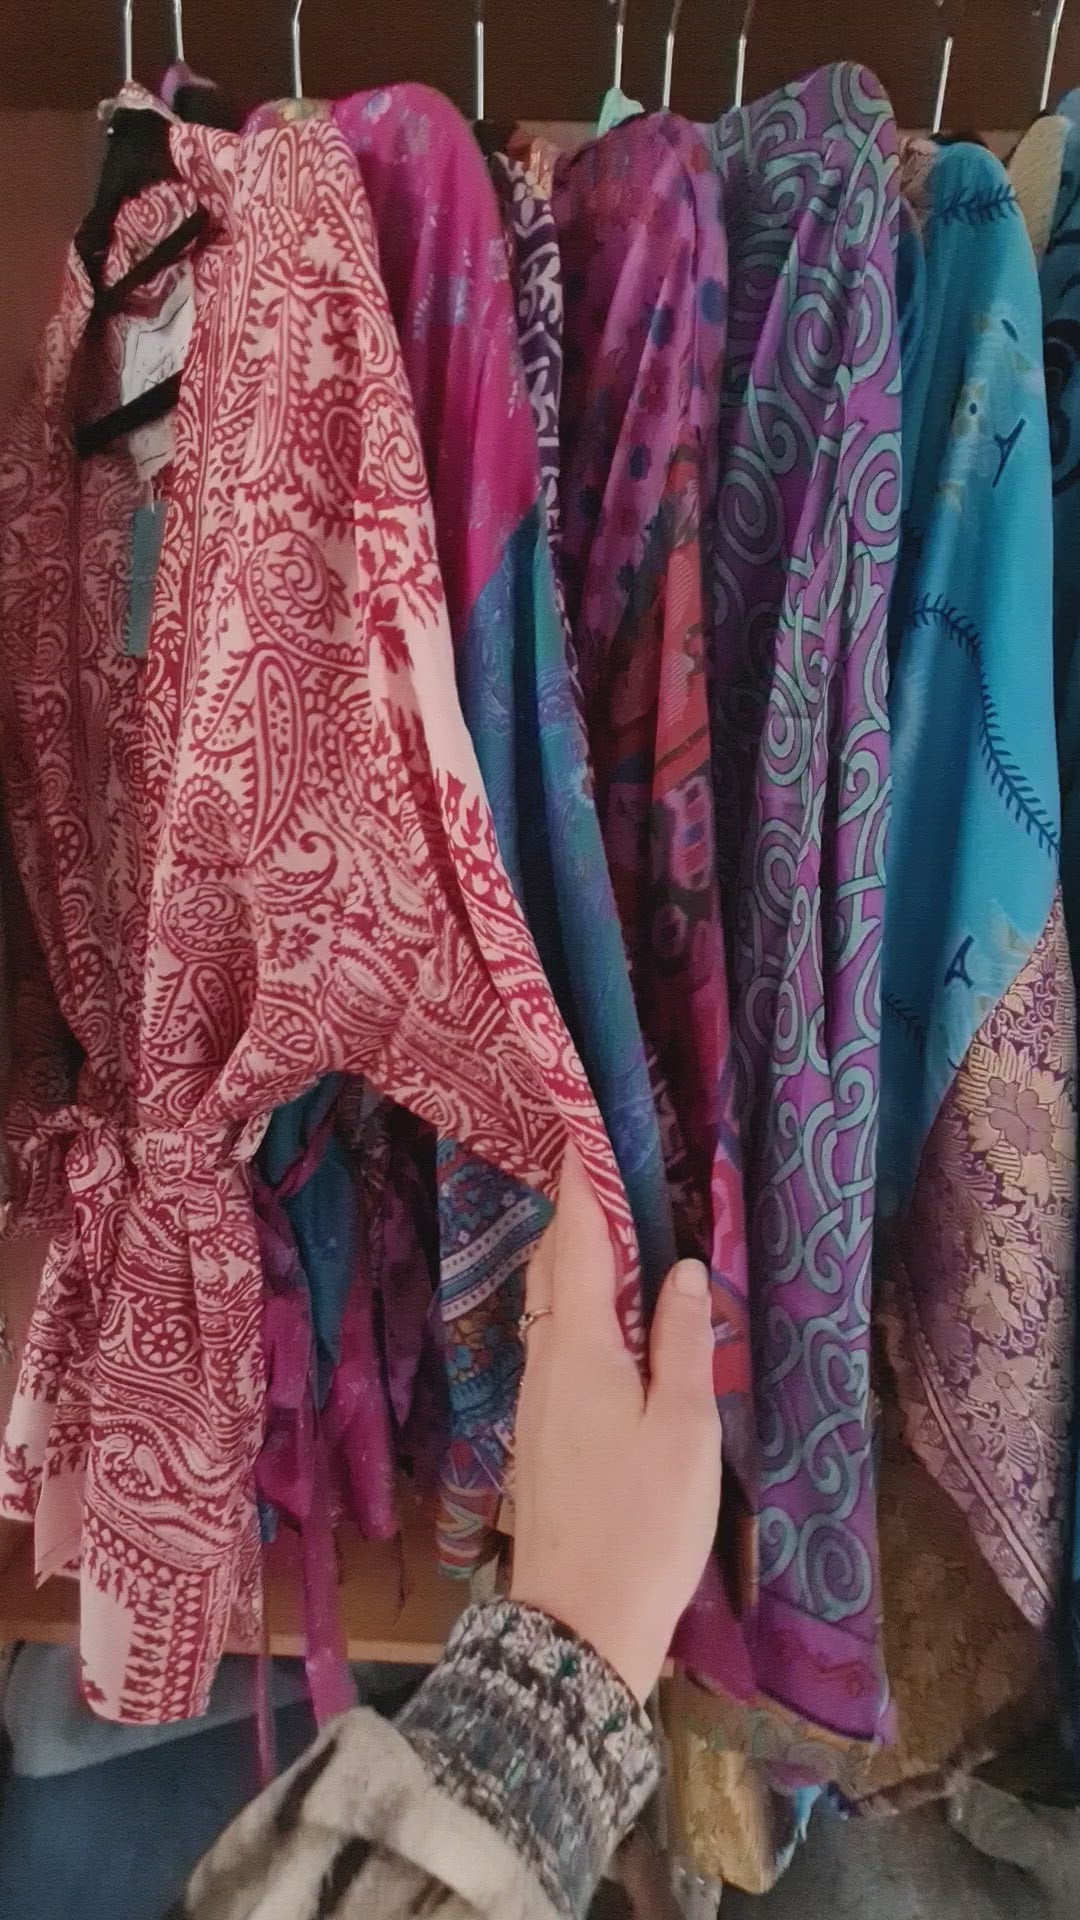 The video shows a feminine hand running along a display of silk kimono jackets, showing individual patterns available as well as the smooth silky texture of the fabric.. The jackets are aligned in colour order.